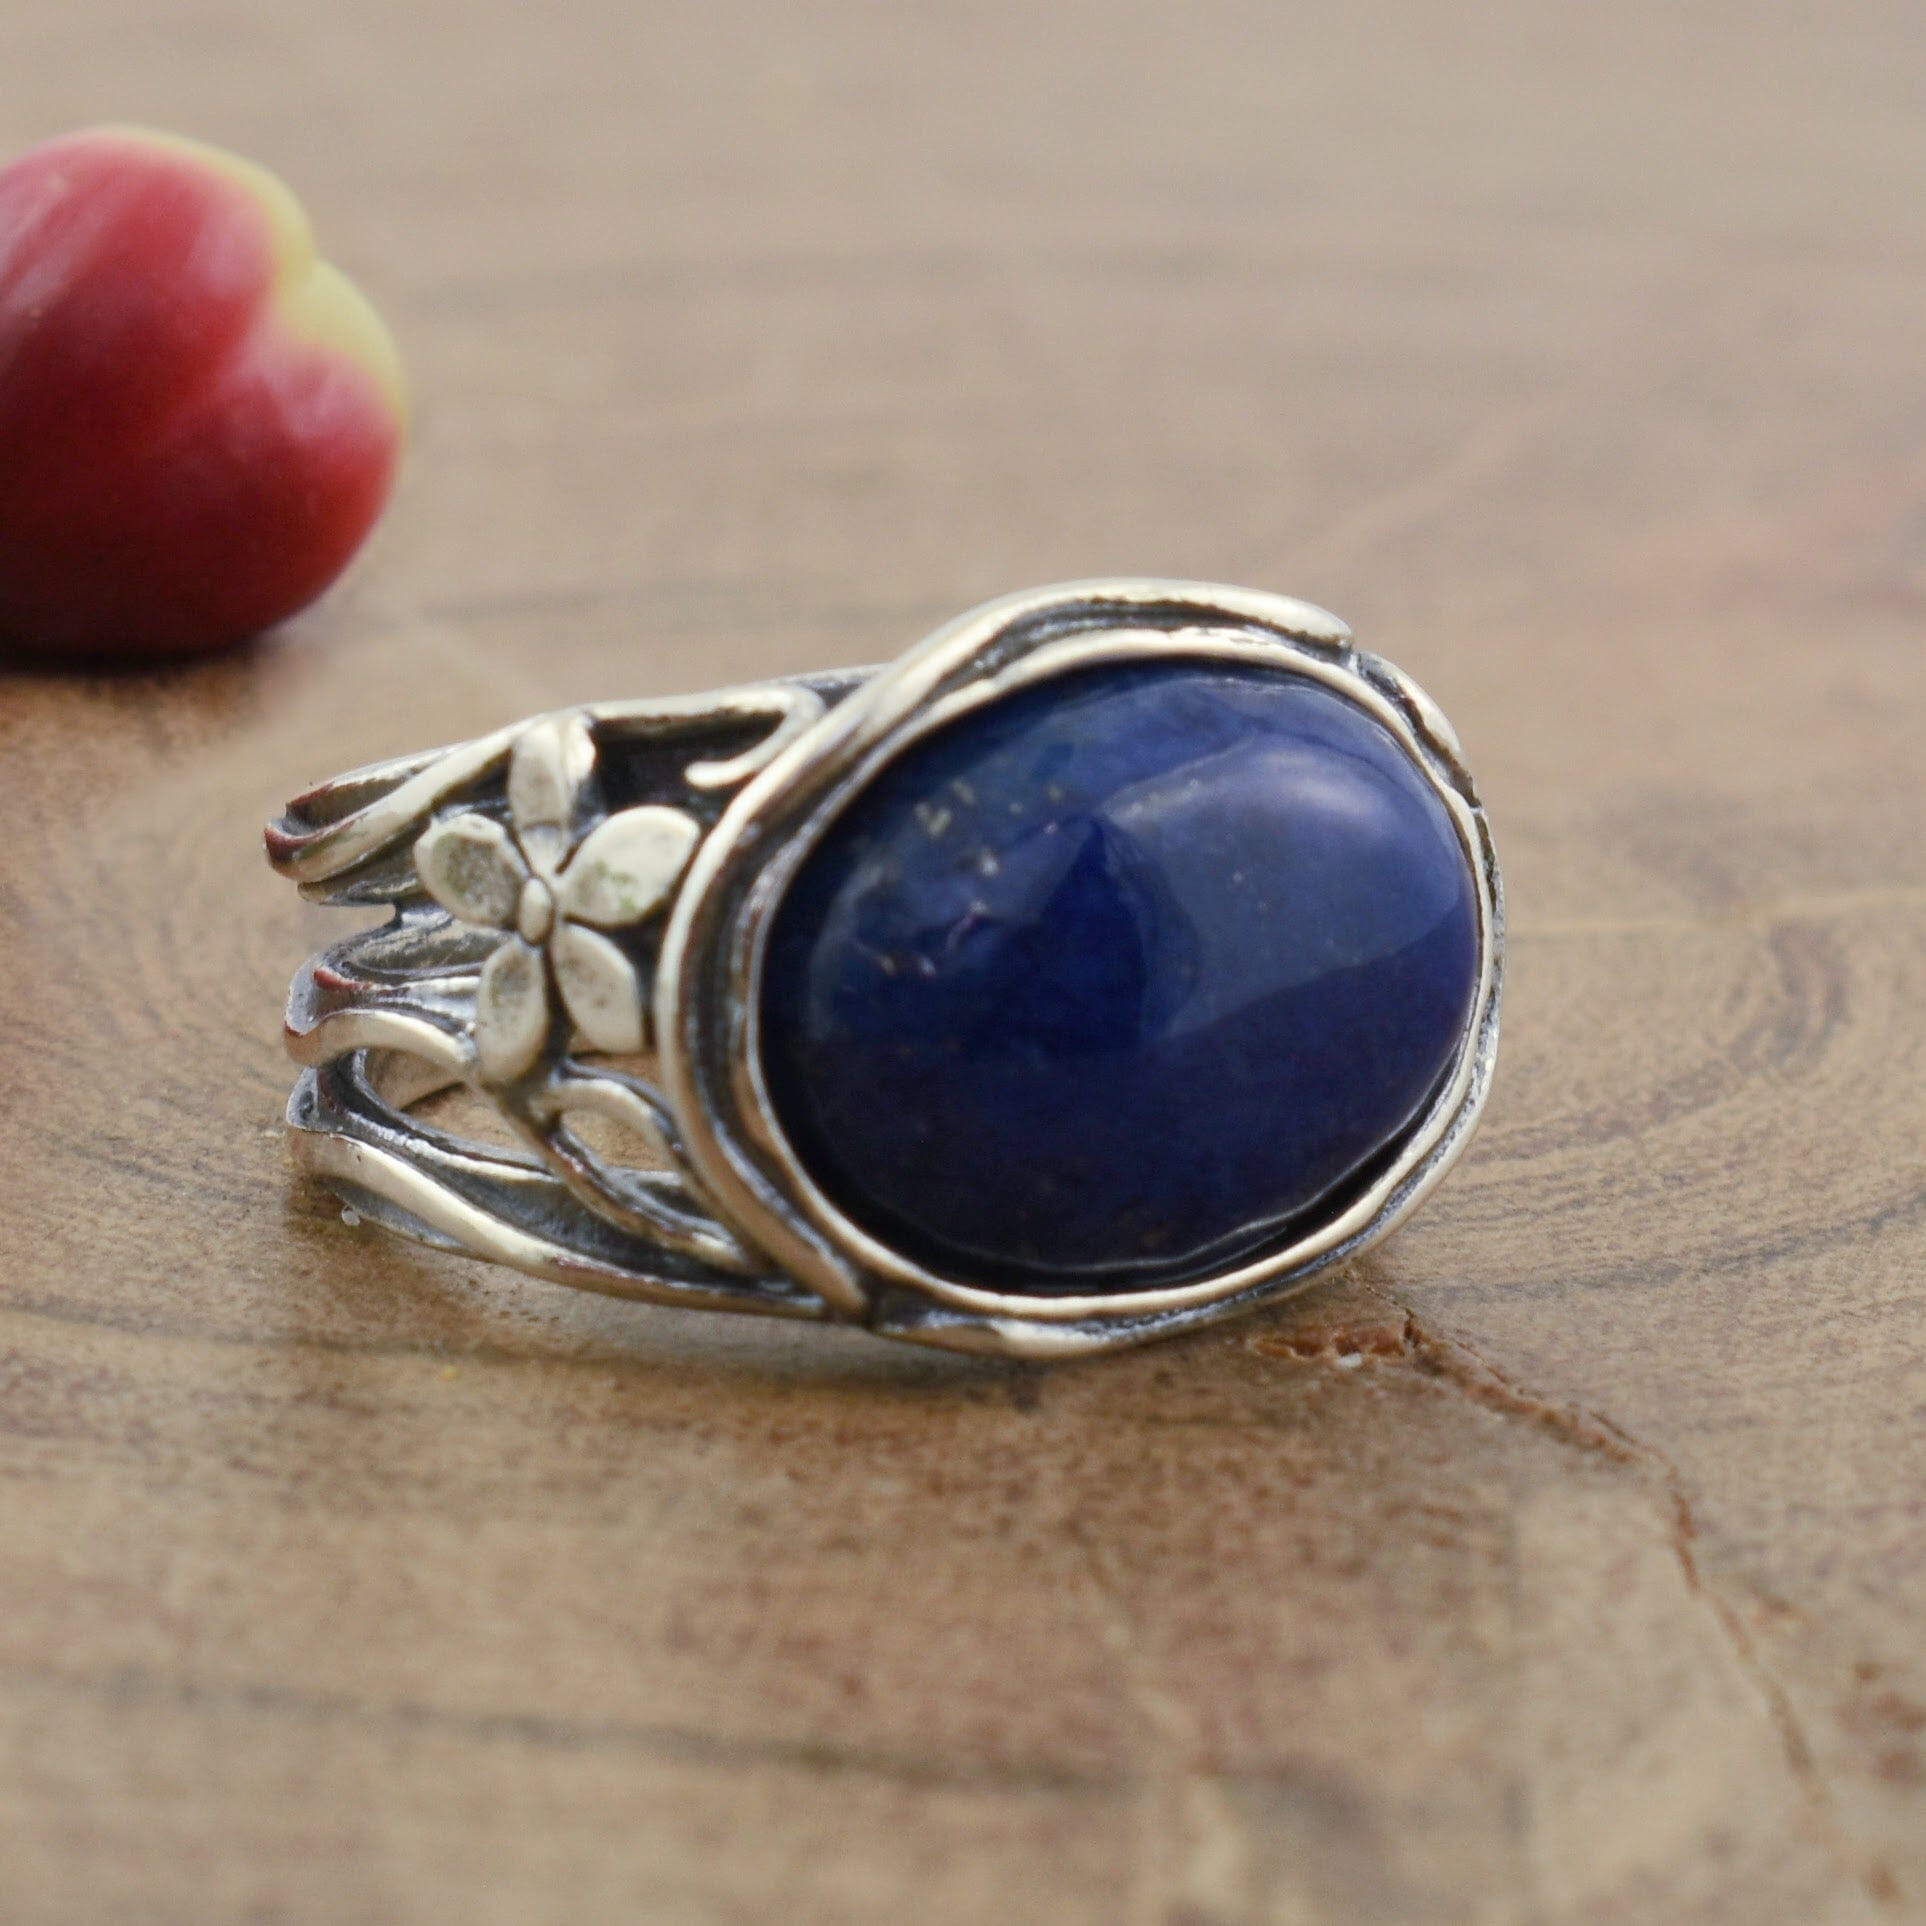 .925 sterling silver ring with oval shaped blue lapis stone